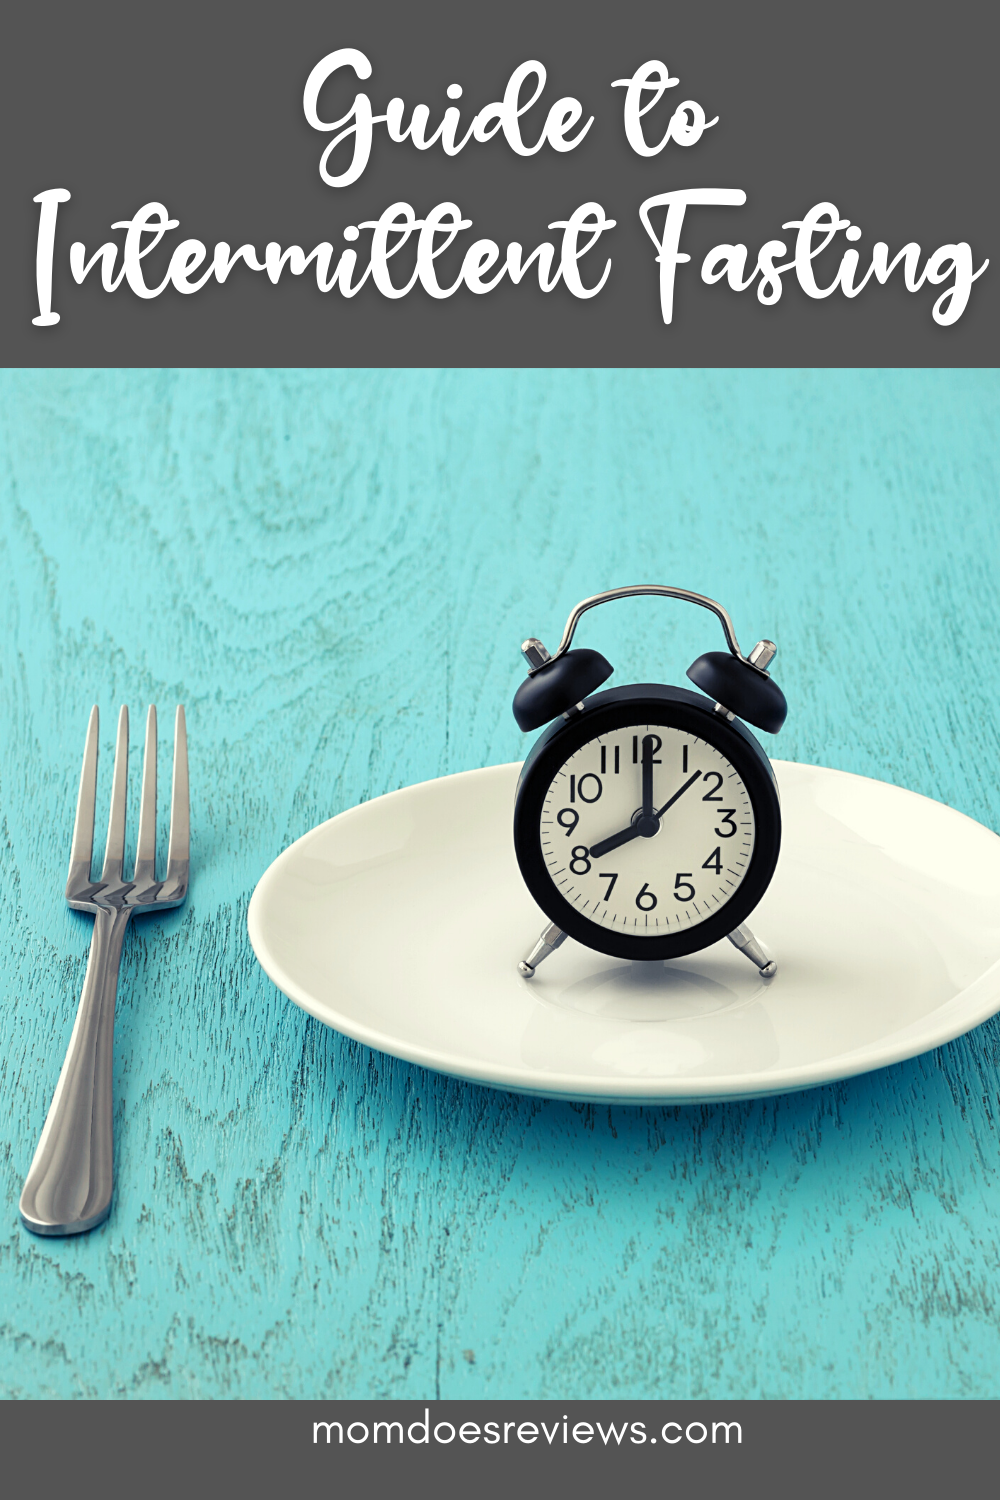 ntermittent Fasting Guide Can Help Manage Fasting Properly